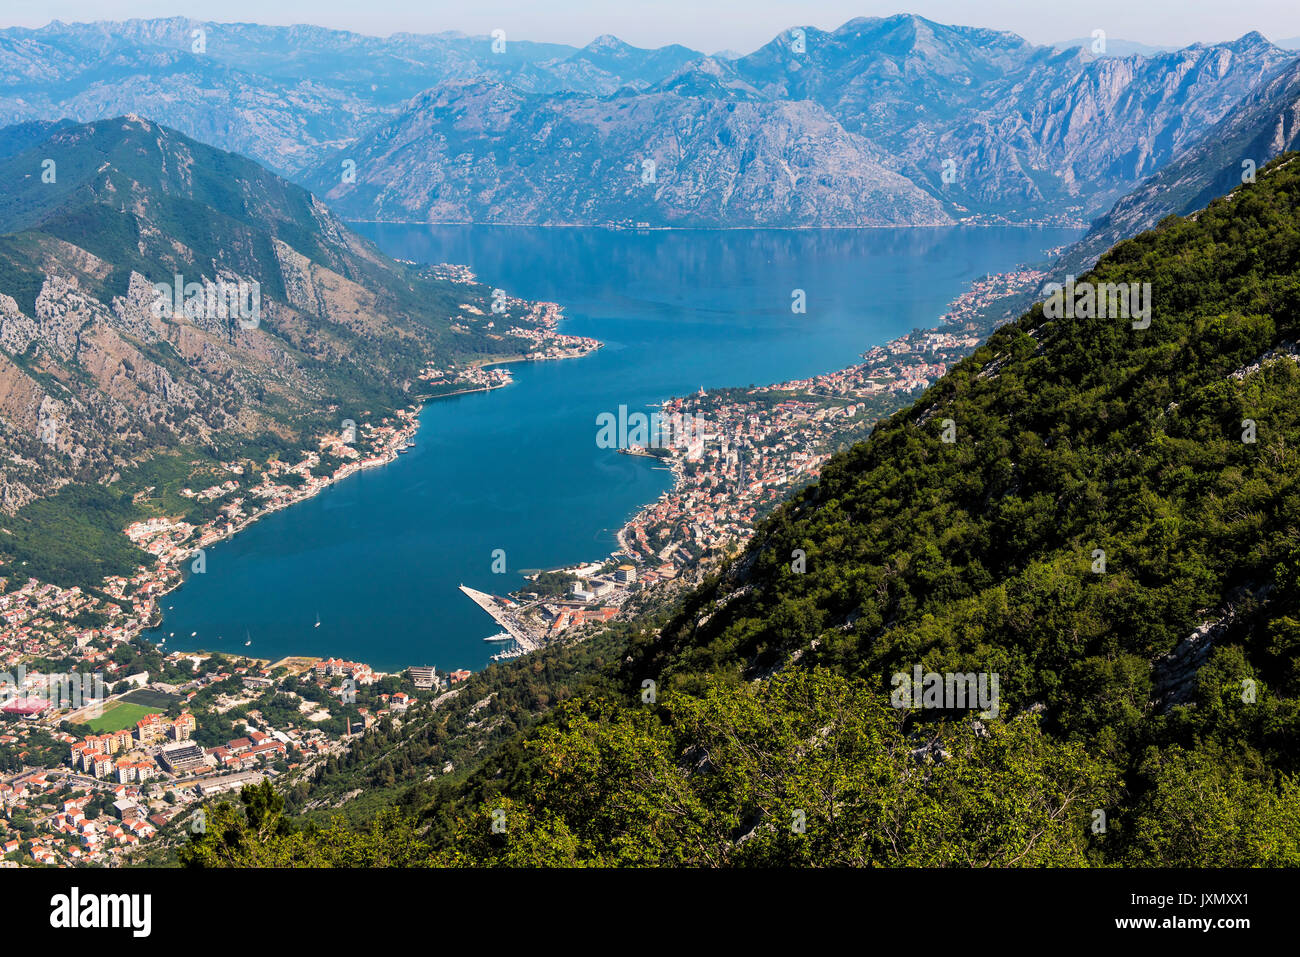 Kotor Bay southwestern Montenegro. The main town seen in the photo is Kotor which is one of the UNESCO’s World Heritage sites Stock Photo